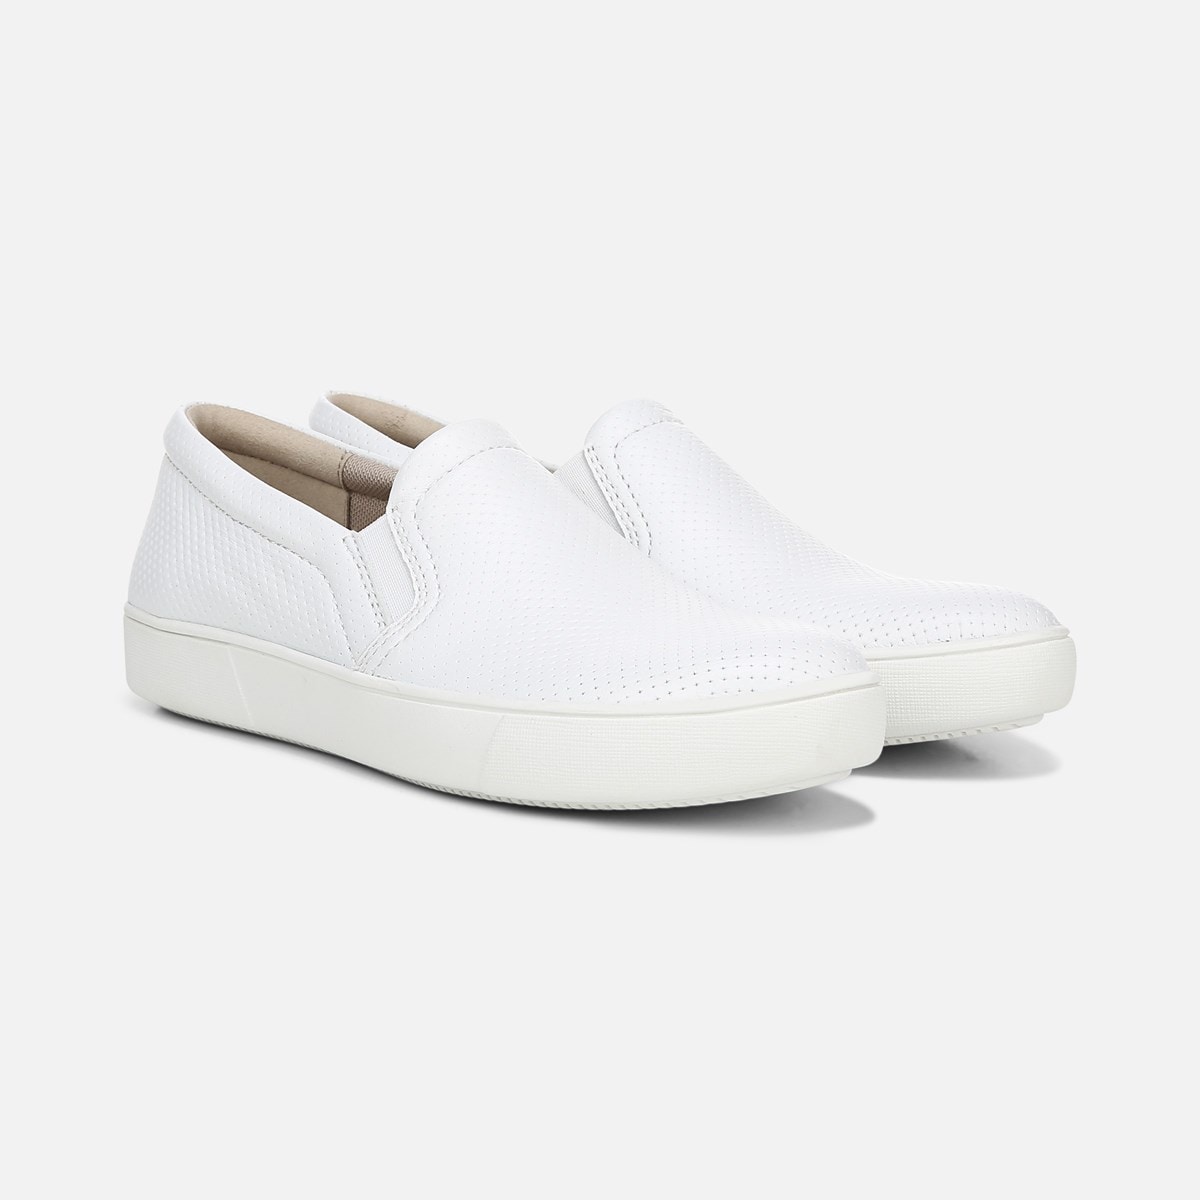 naturalizer white leather sneakers